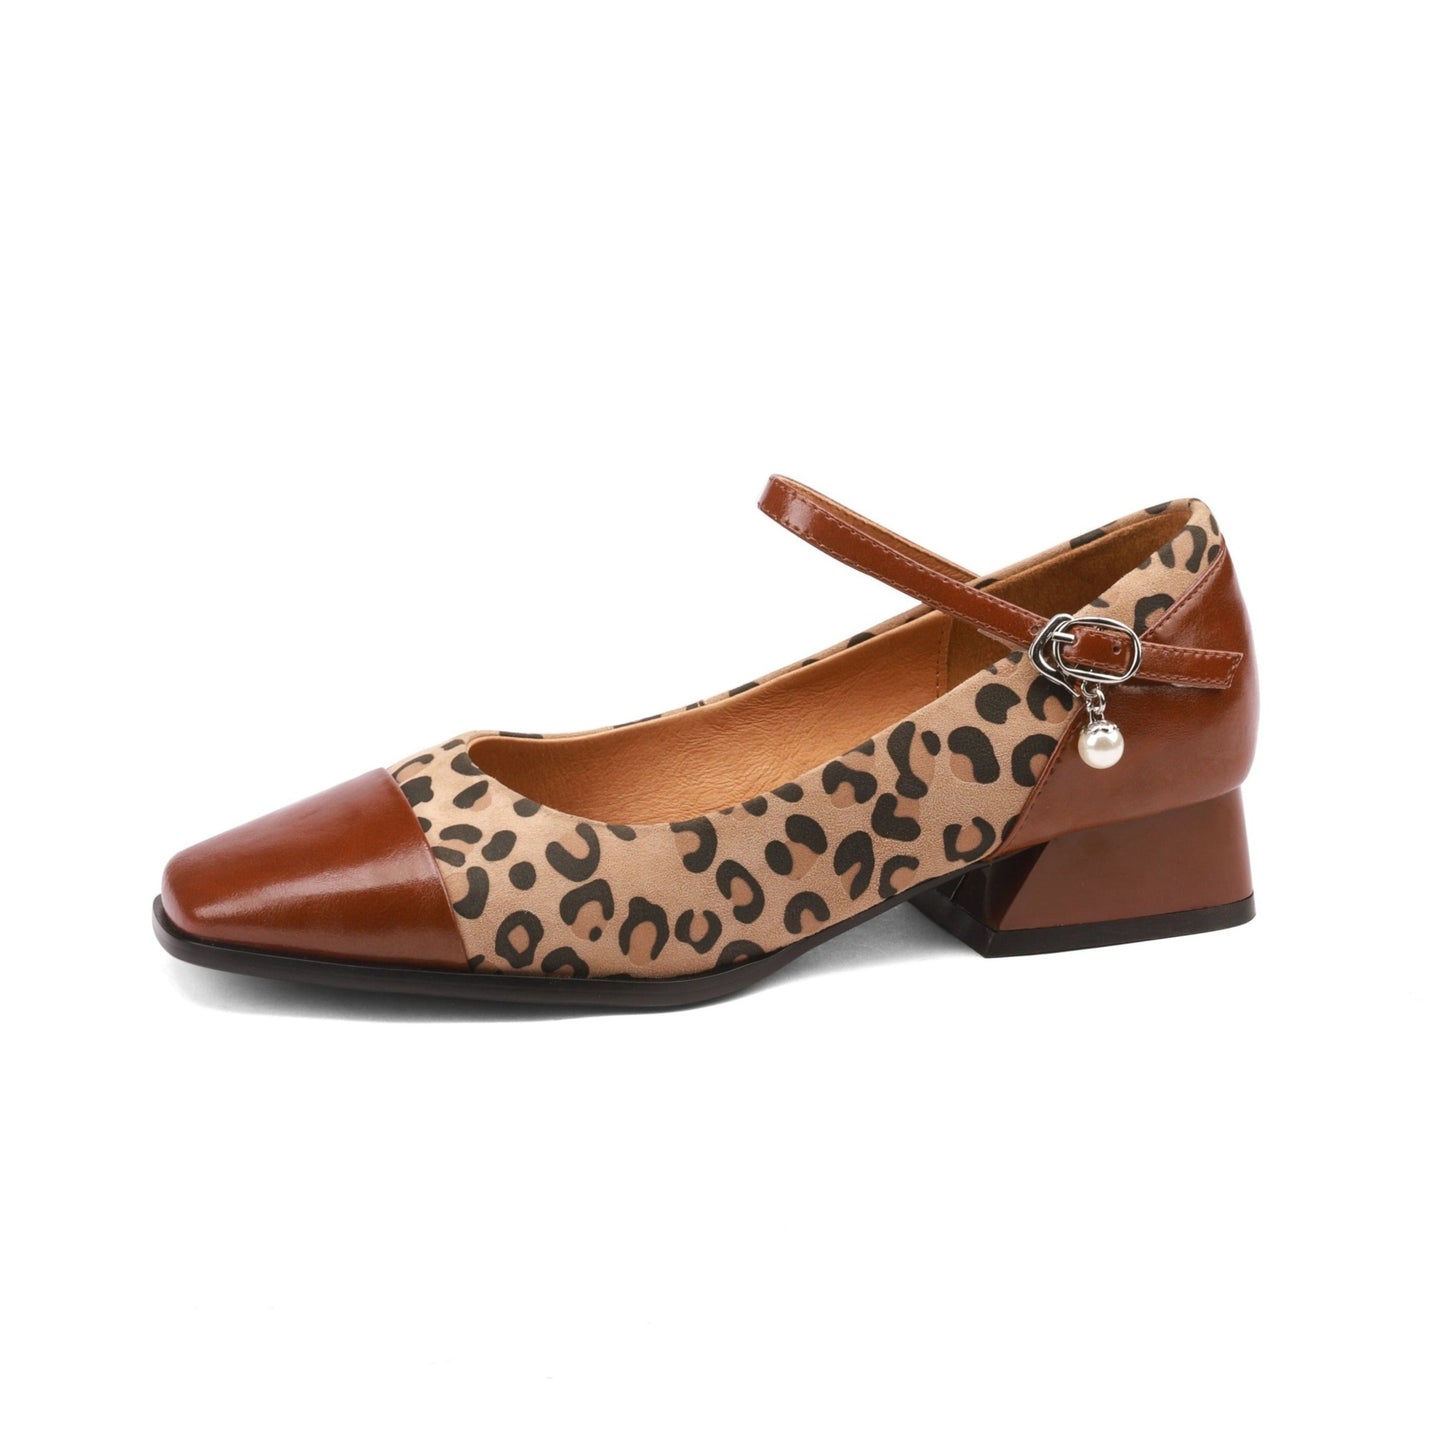 TinaCus Women's Square Toe Leopard Print Genuine Leather Handmade Low Heel Chic Mary Jane Shoes